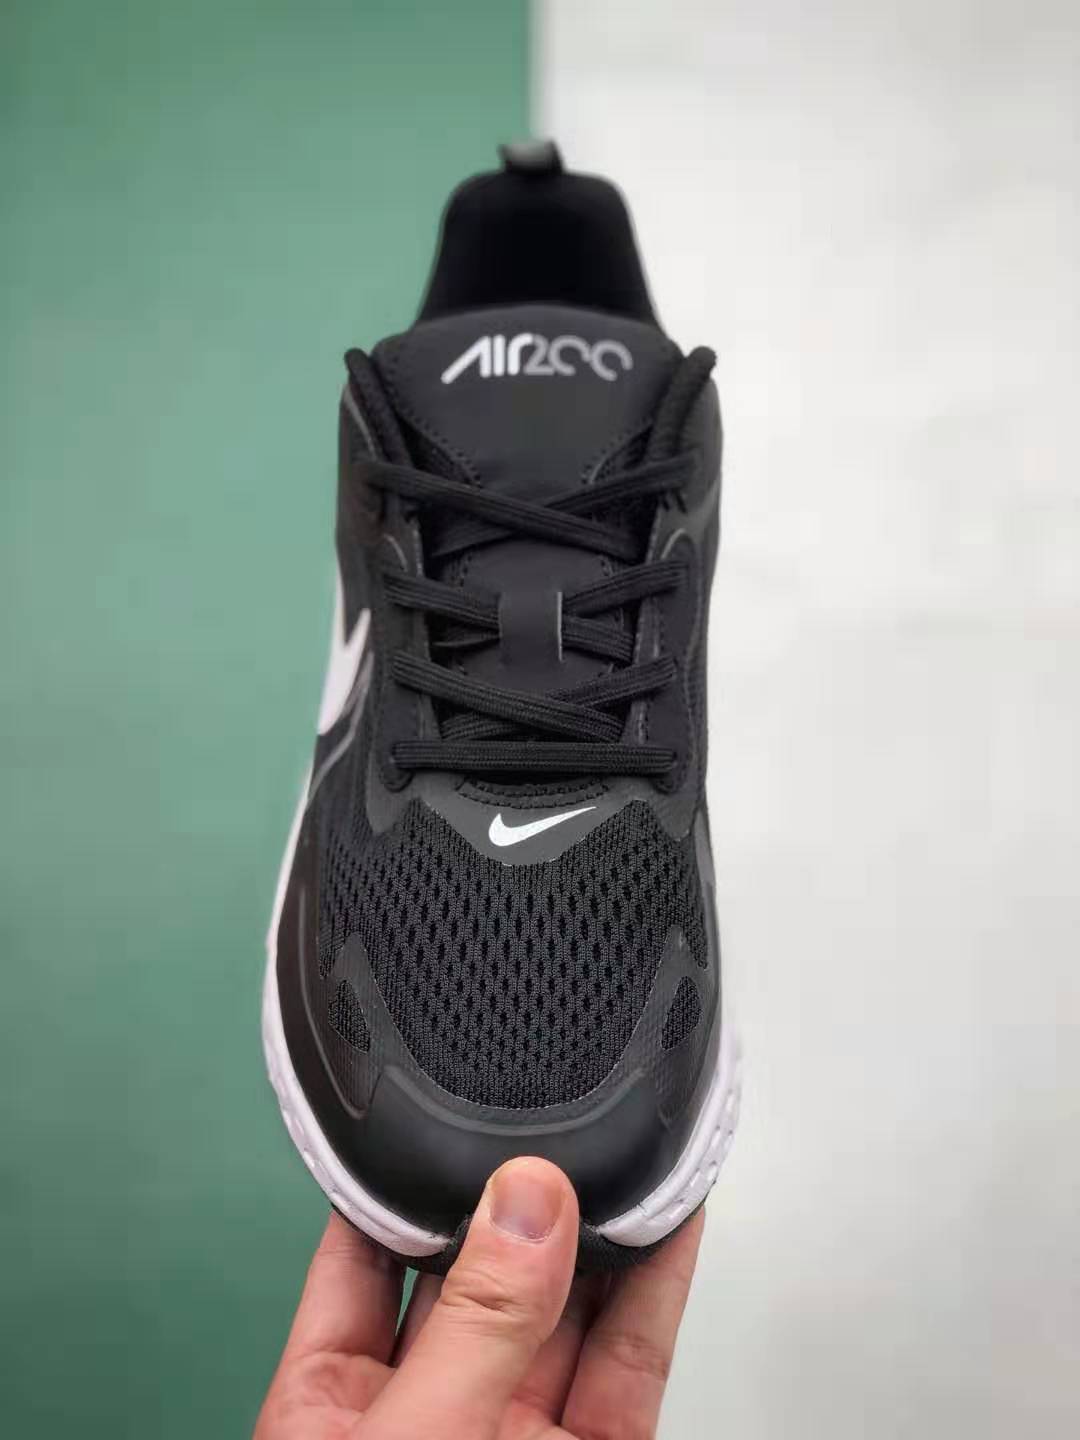 Nike Air Max 200 Double Swoosh Black White 589568-001 | Latest Release and Stylish Design | Fast Shipping Available